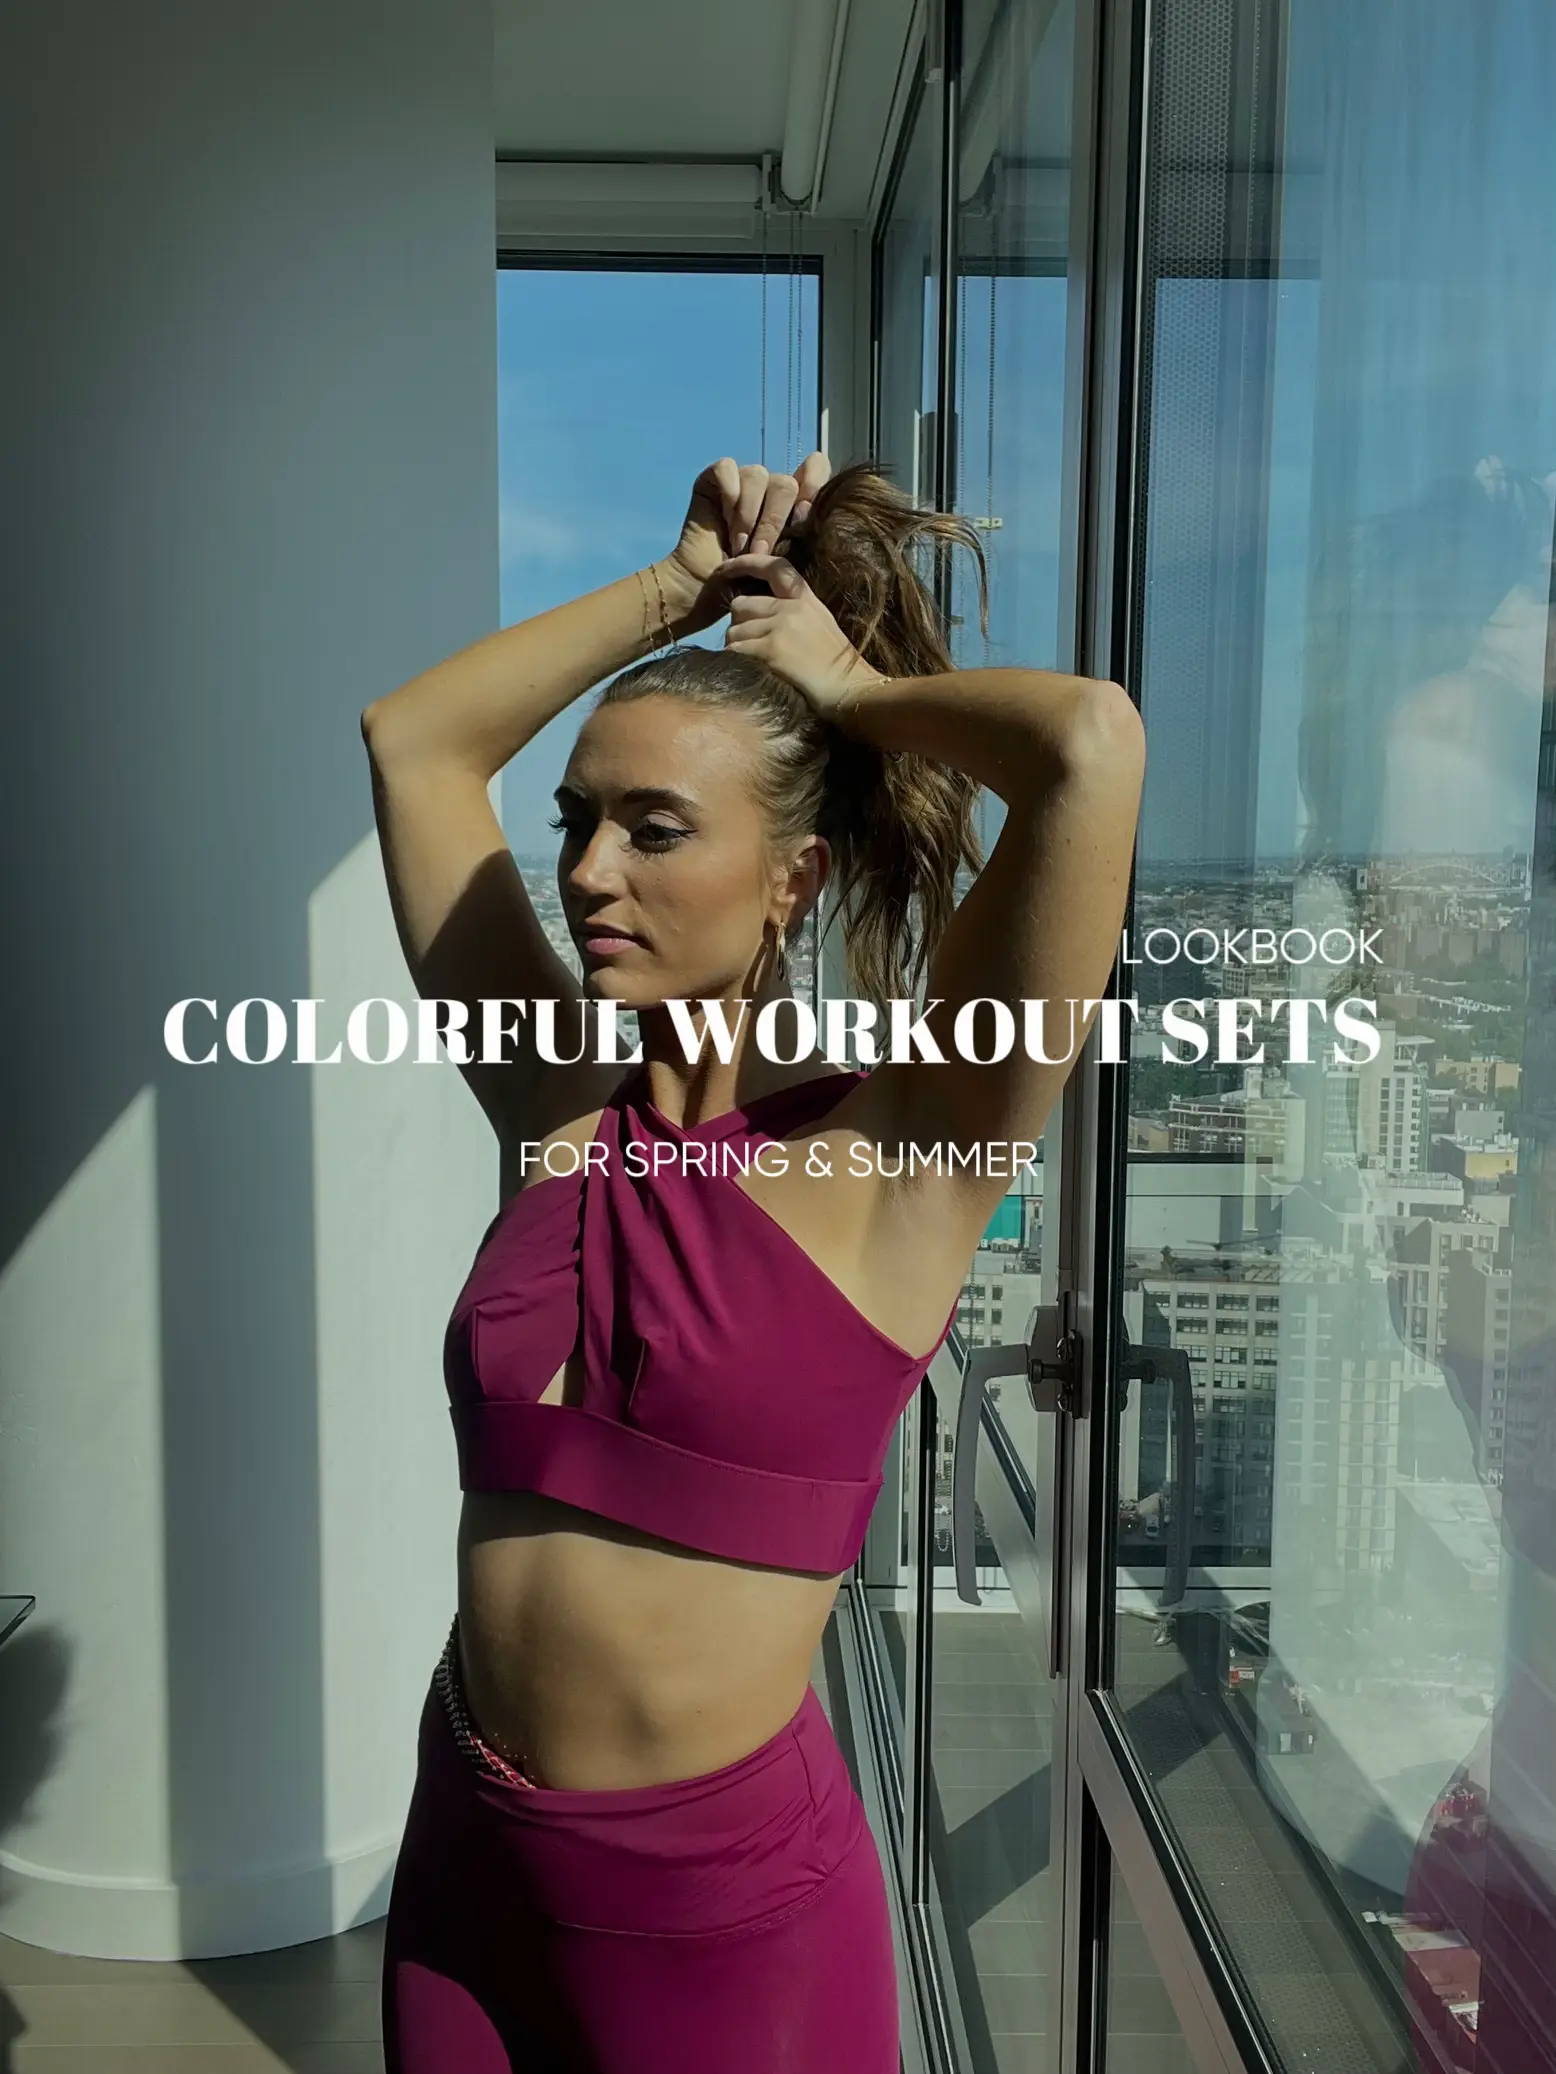 Pink Gilly Hicks ‘Let’s Bounce’ sports bra